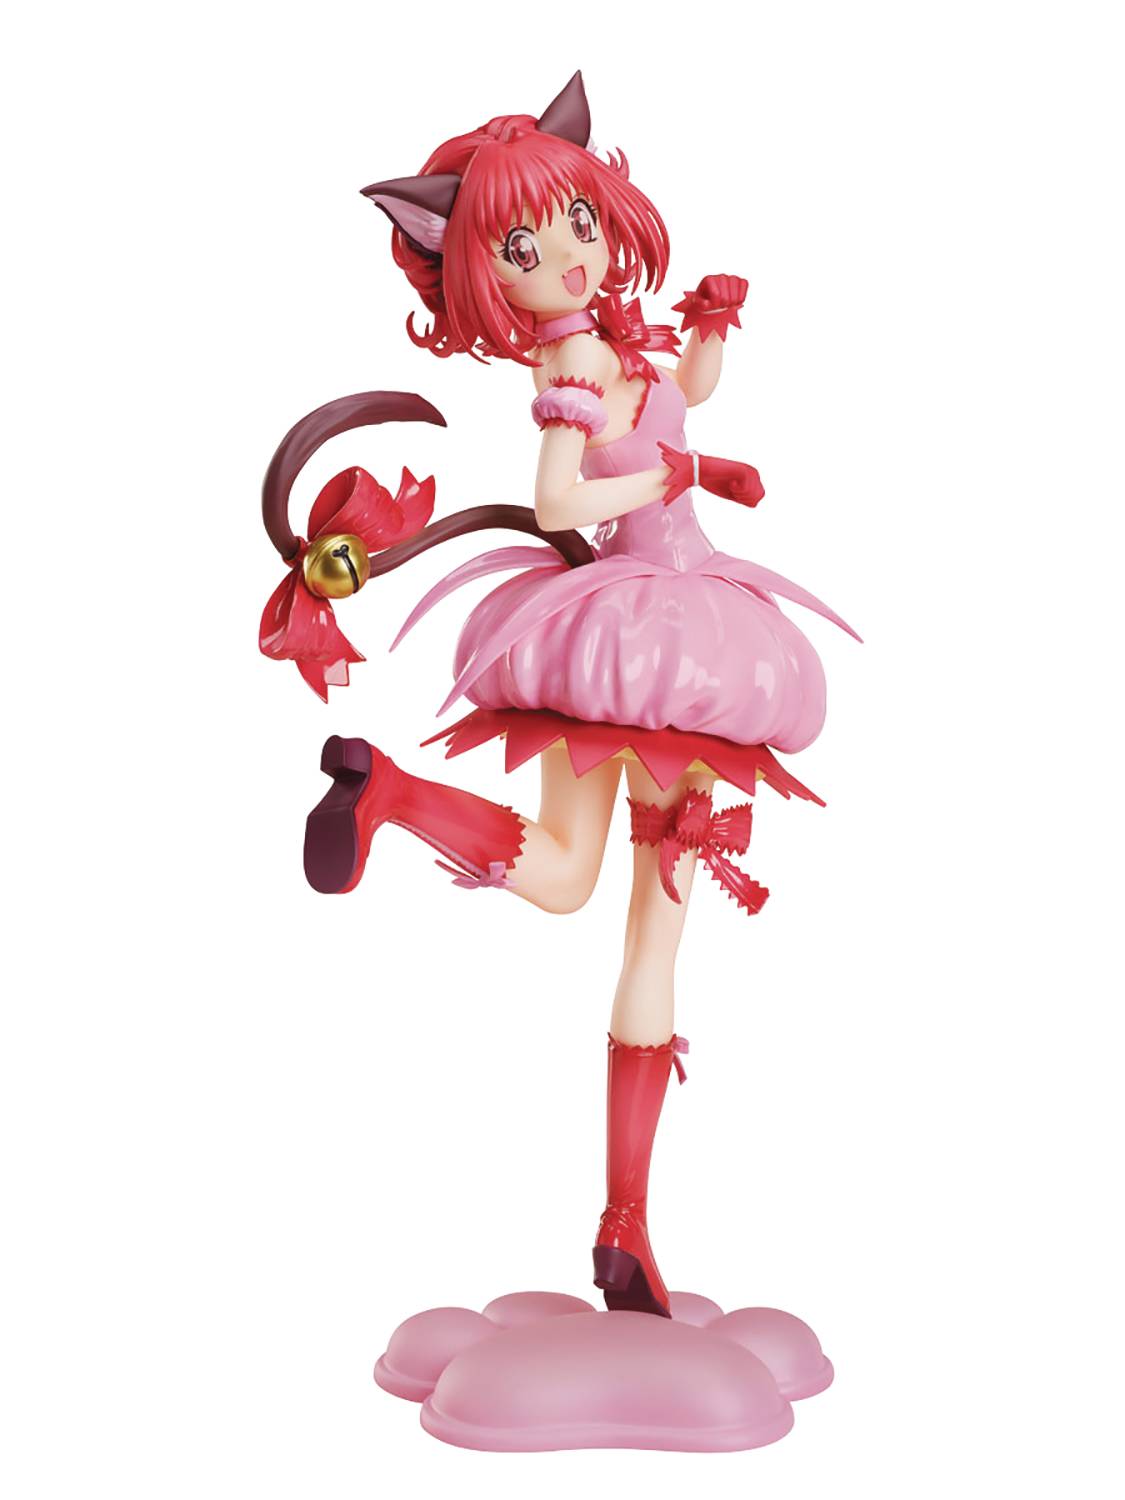 Tokyo Mew Mew New Anime 2023 Characters Episodes  More   StreamingDueCom